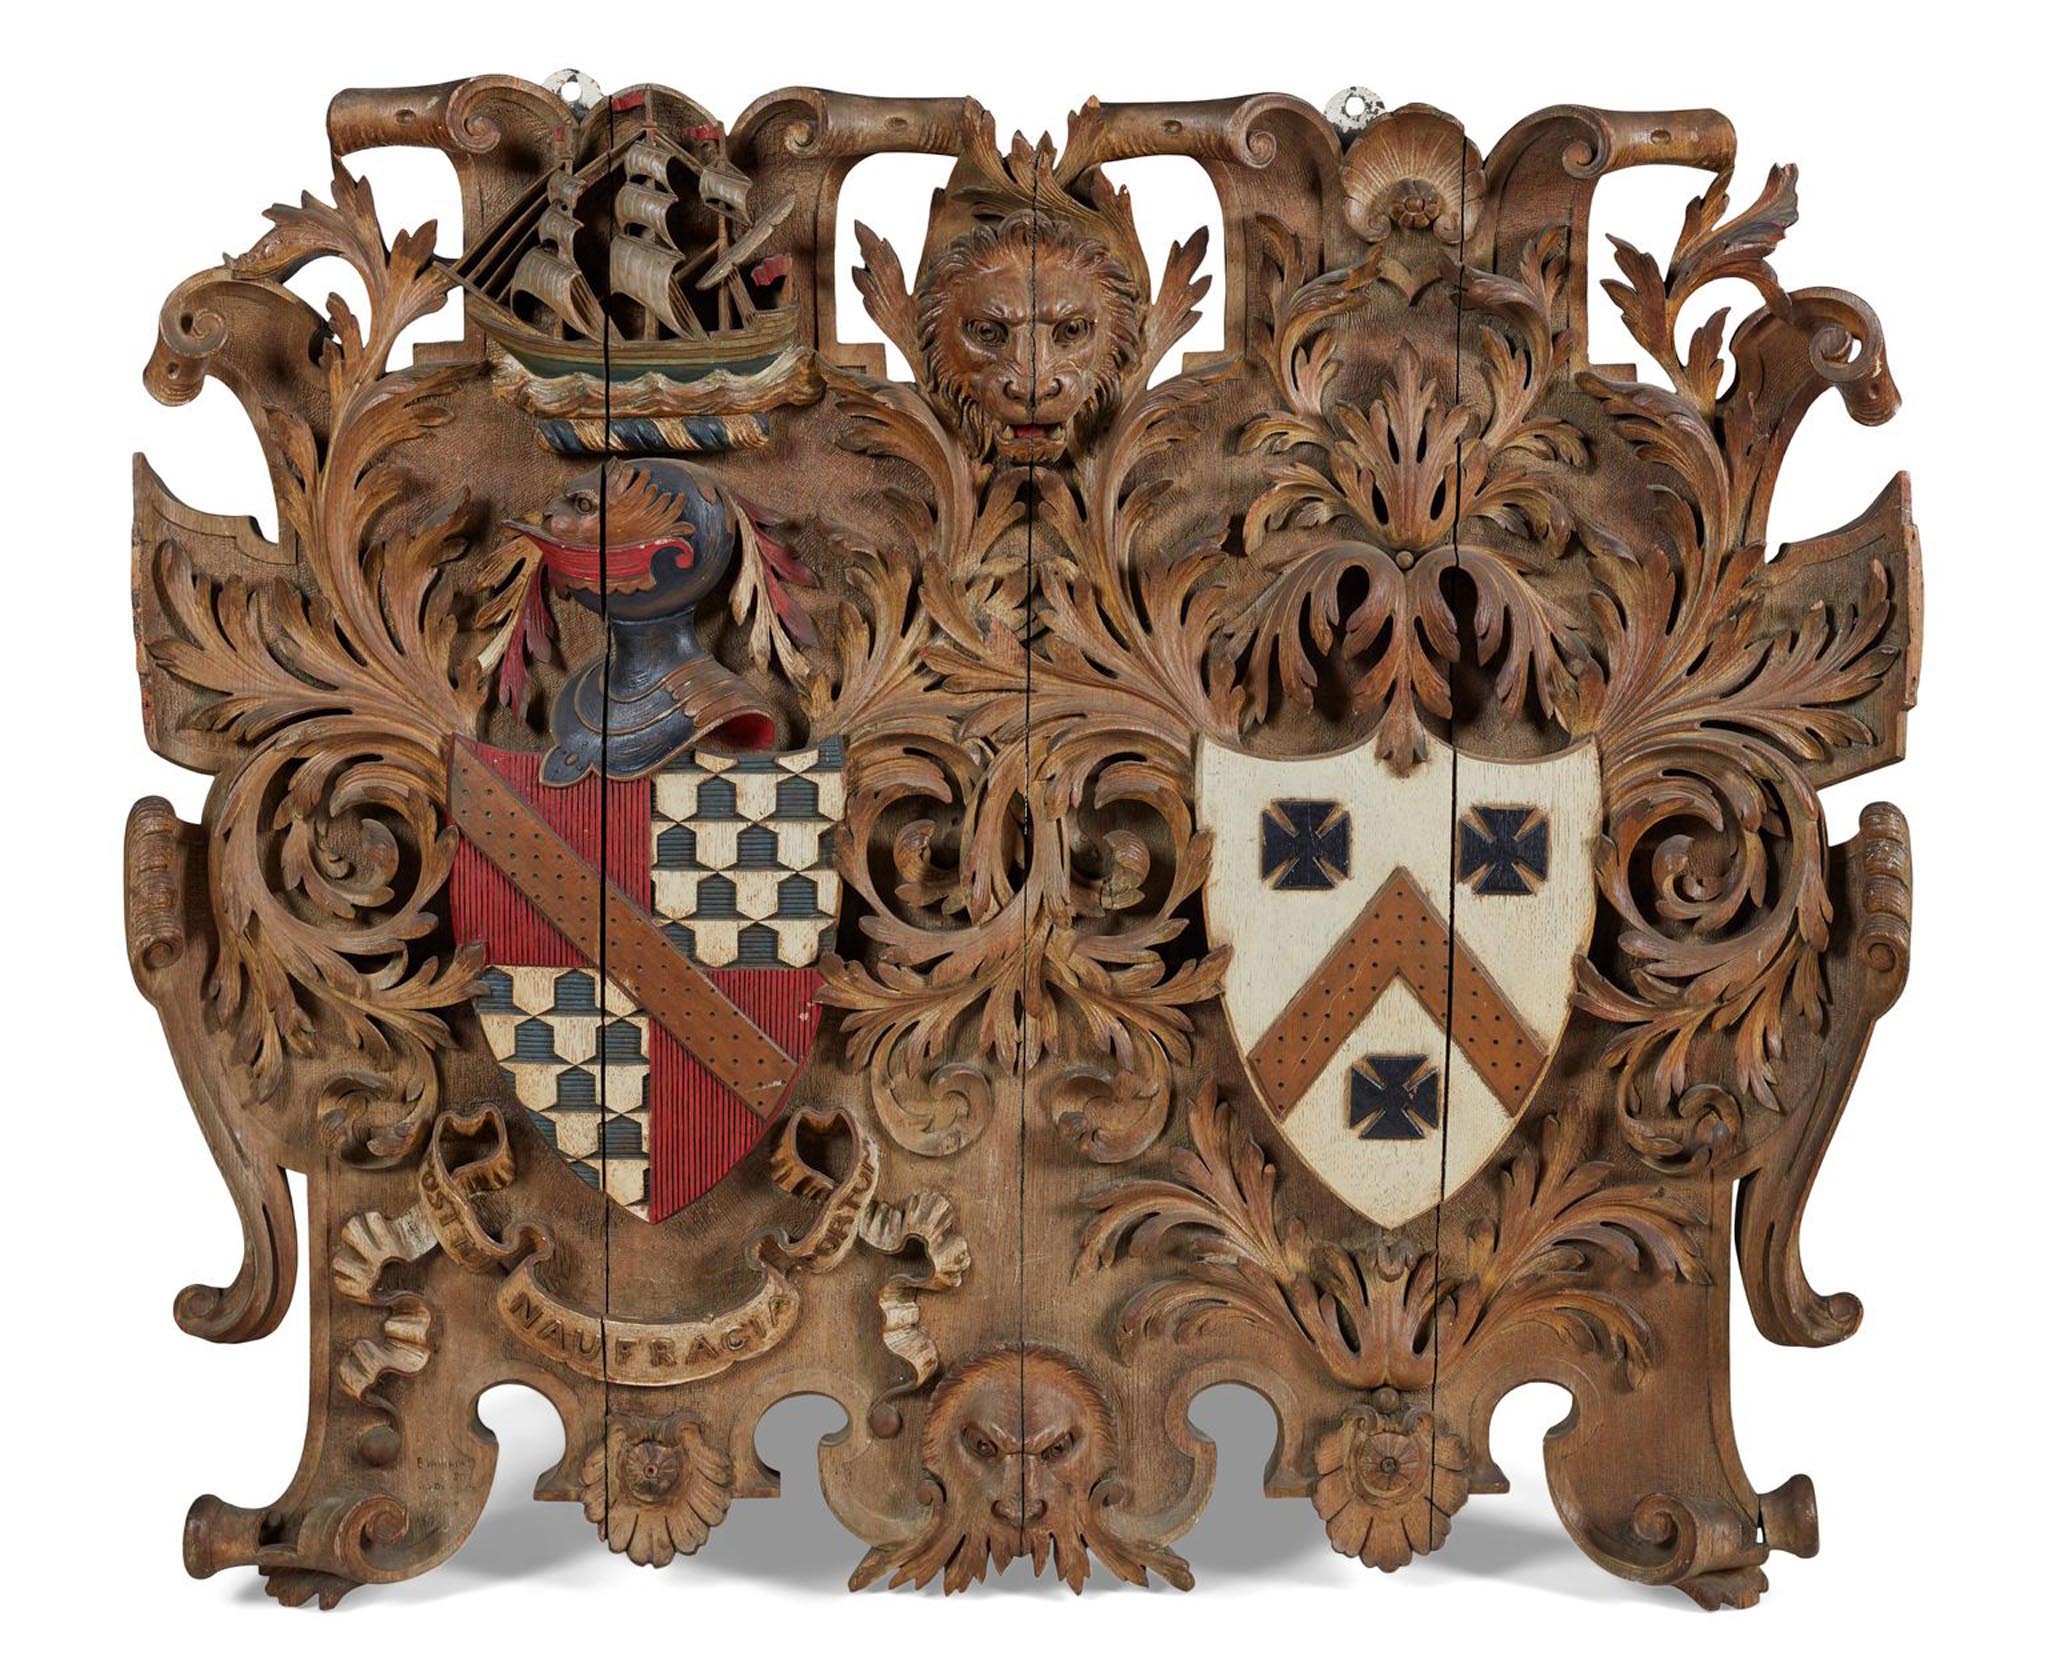 LOT 412 | LARGE VICTORIAN CARVED AND POLYCHROMED OAK COAT-OF-ARMS FOR STRICKLAND-CONSTABLE SIGNED AND DATED 1890 | £1,500 - £2,500 + fees